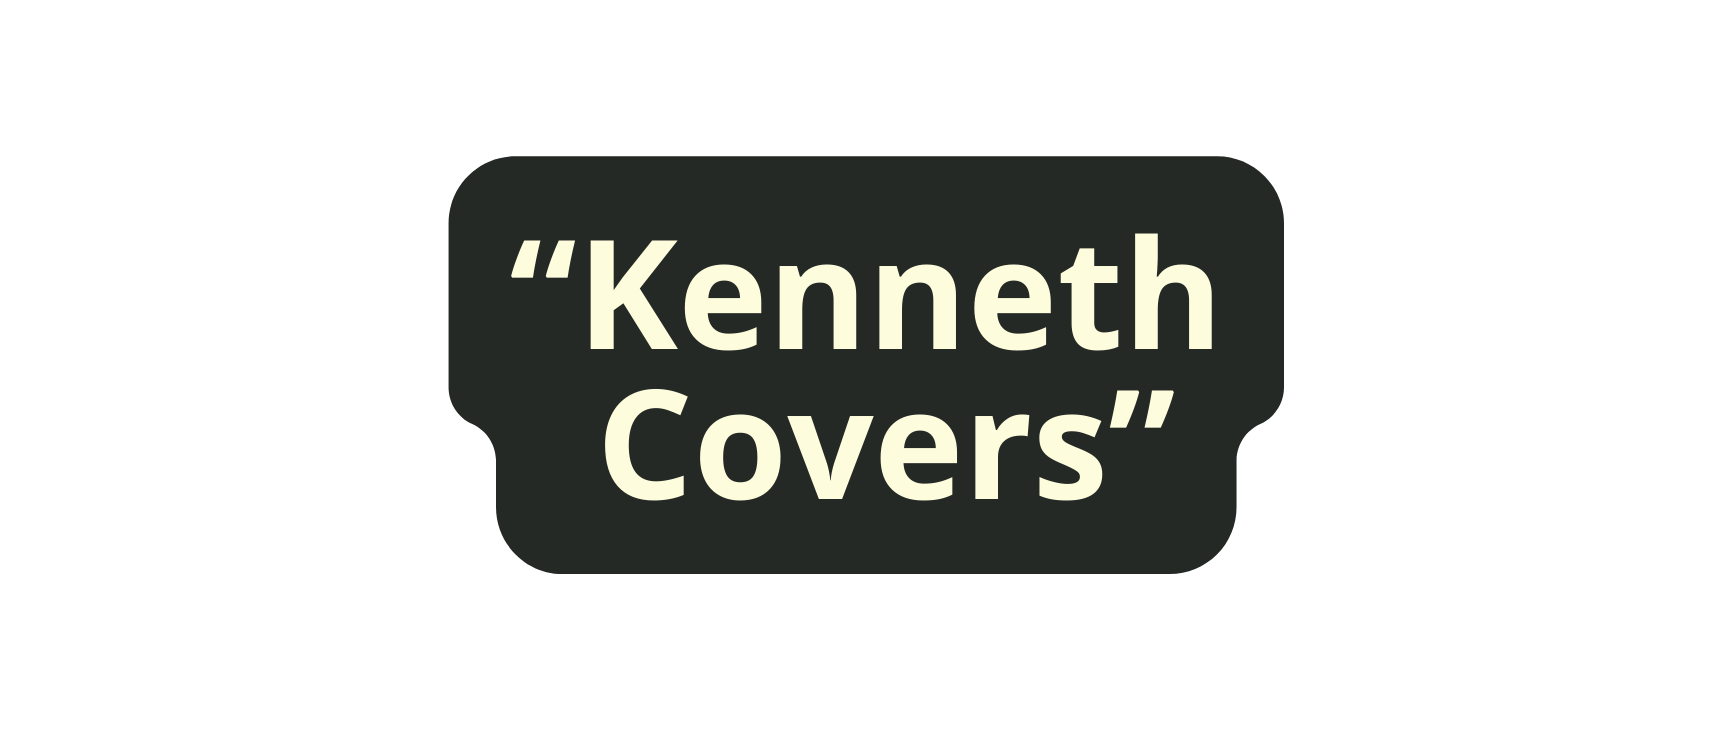 Kenneth Covers